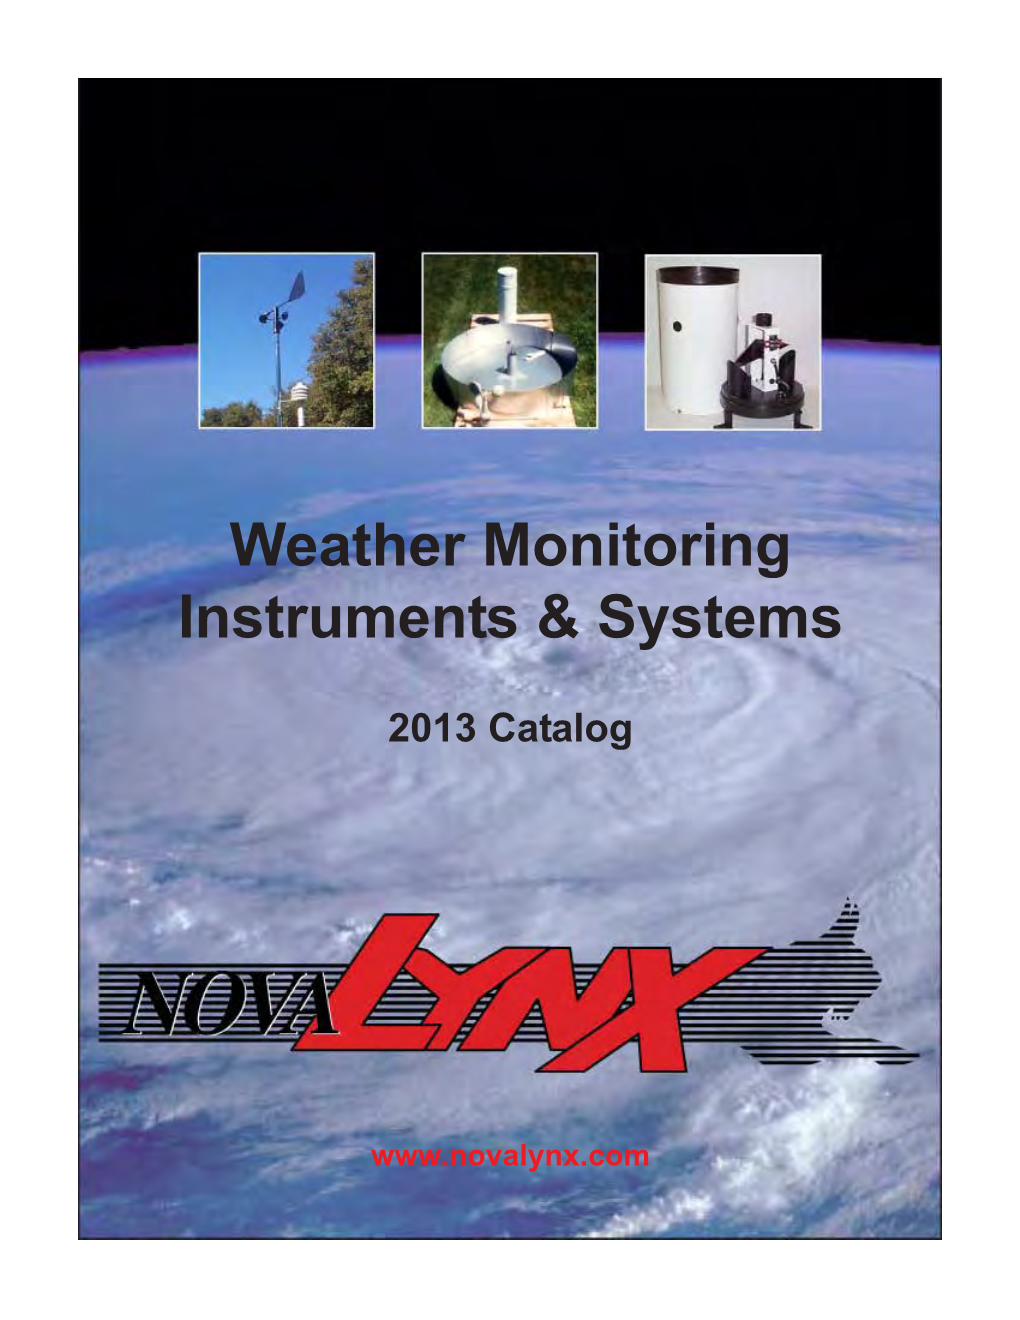 Weather Monitoring Instruments & Systems